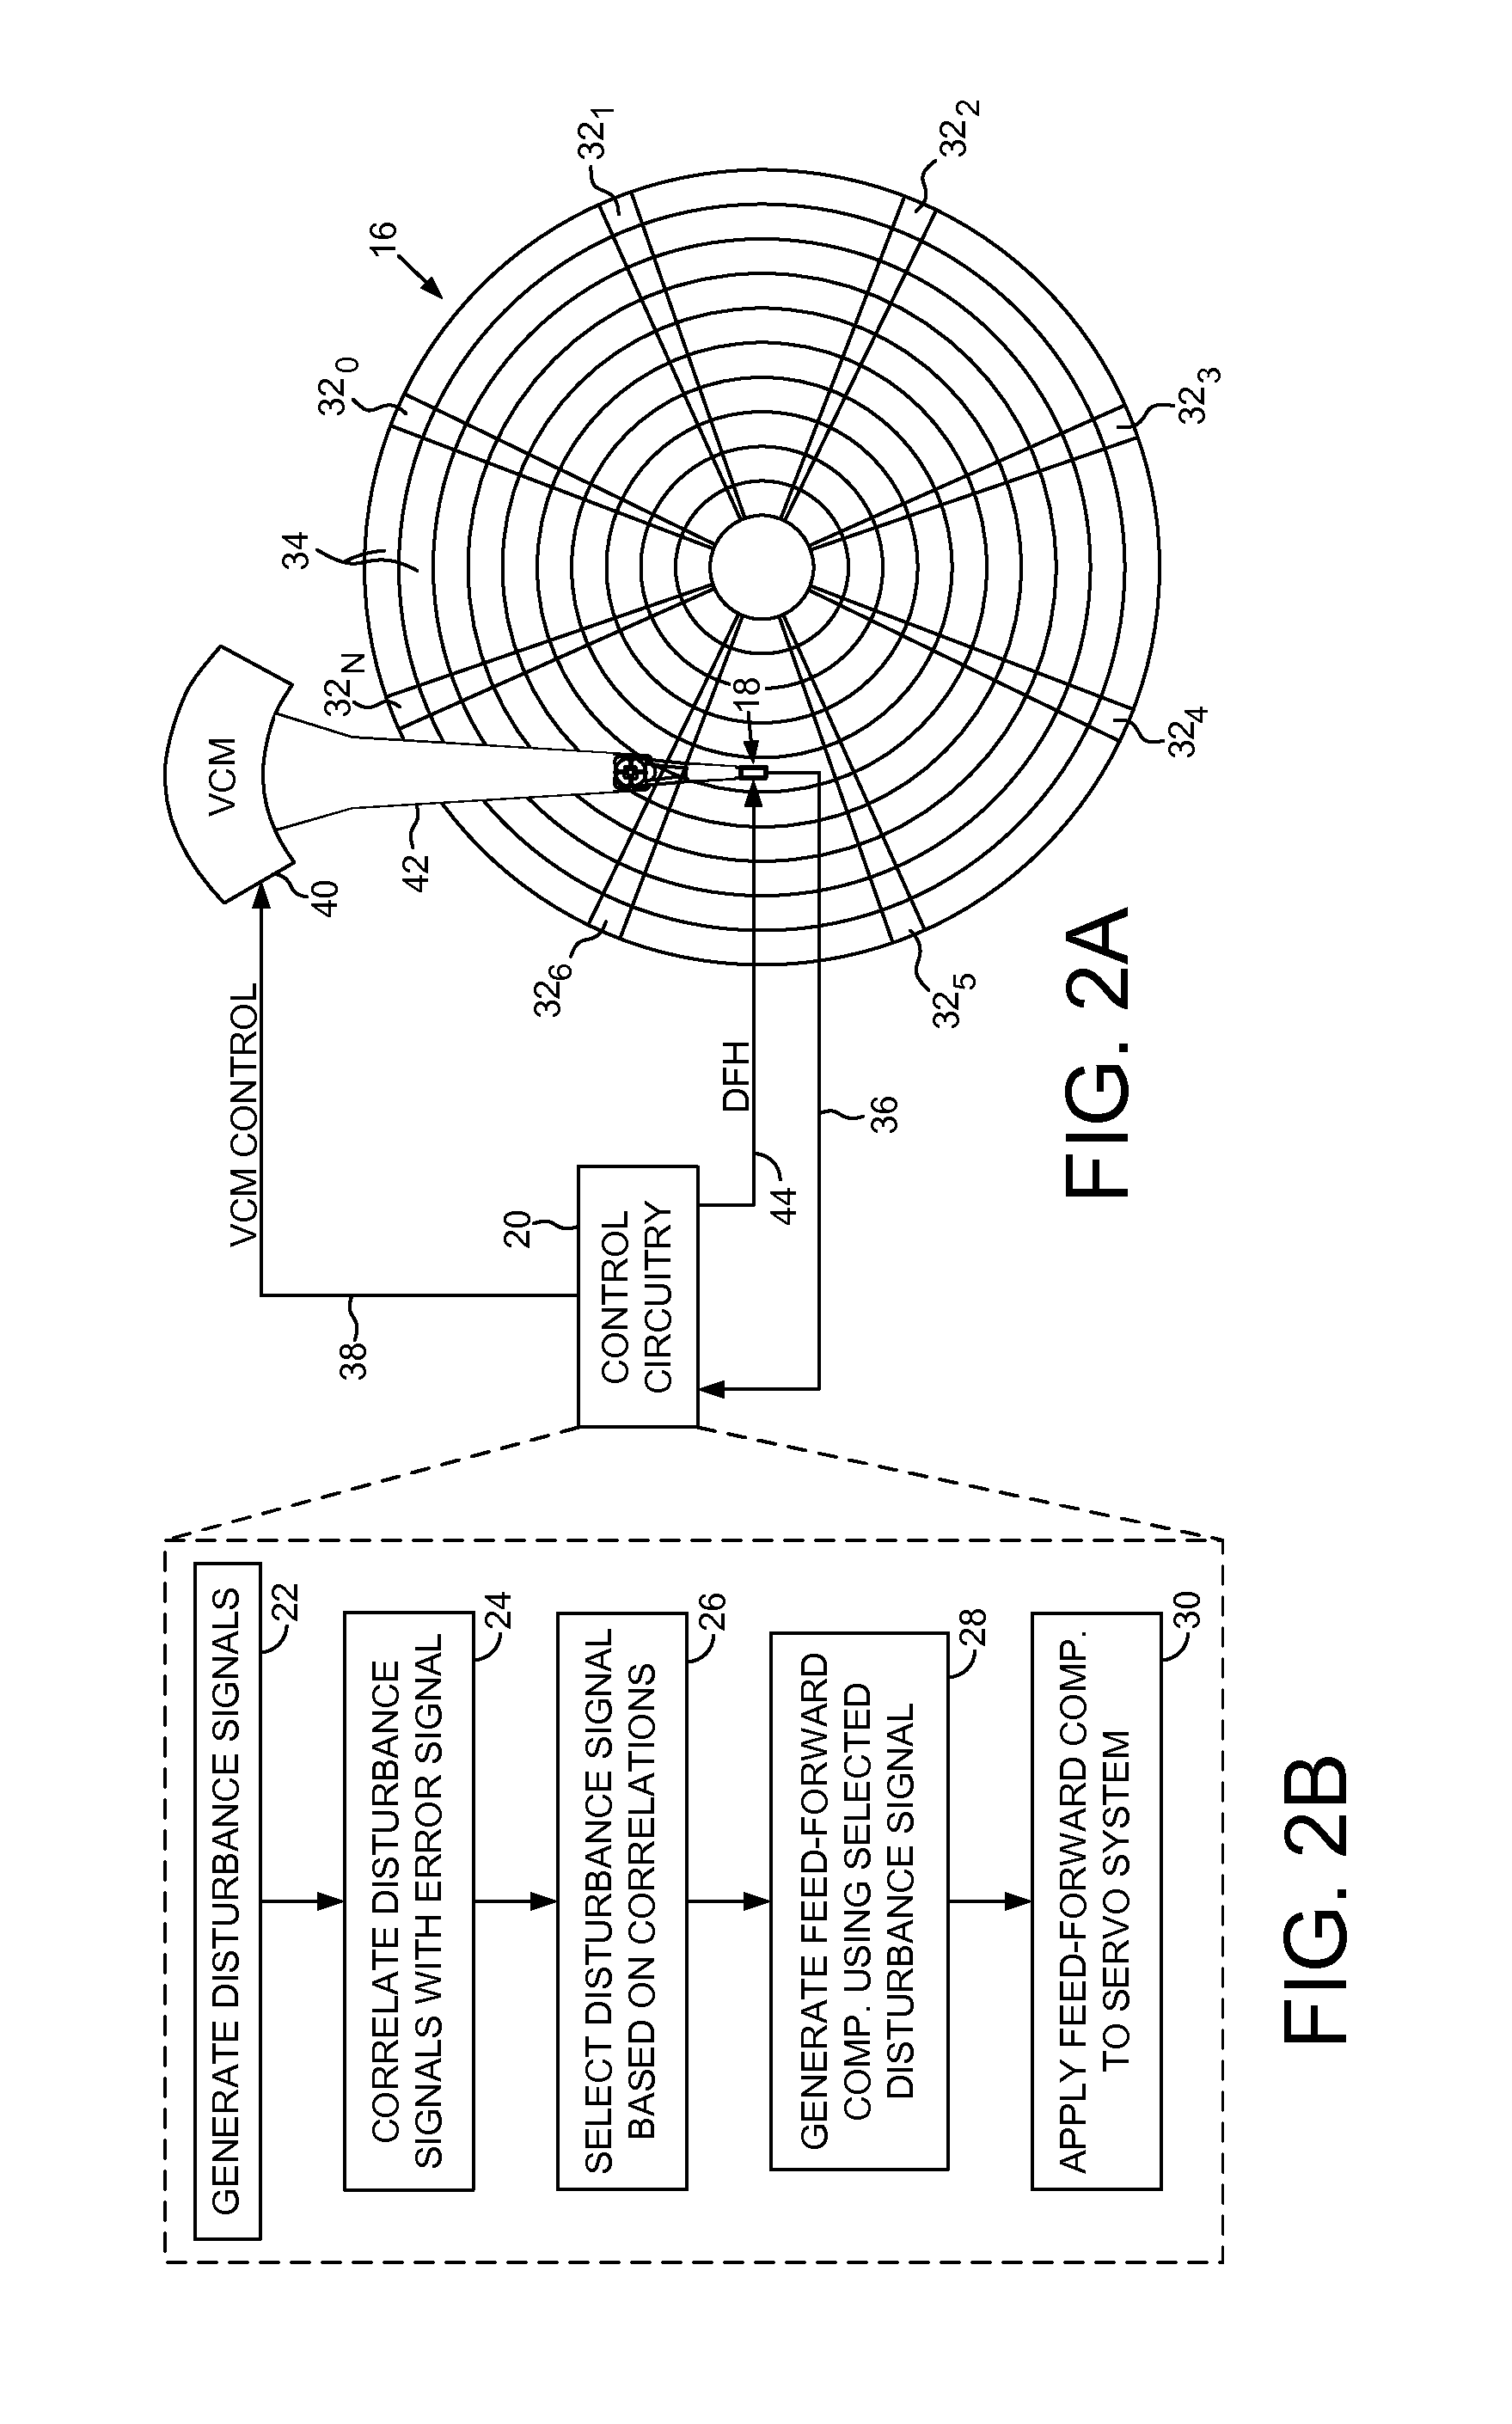 Disk drive selecting disturbance signal for feed-forward compensation